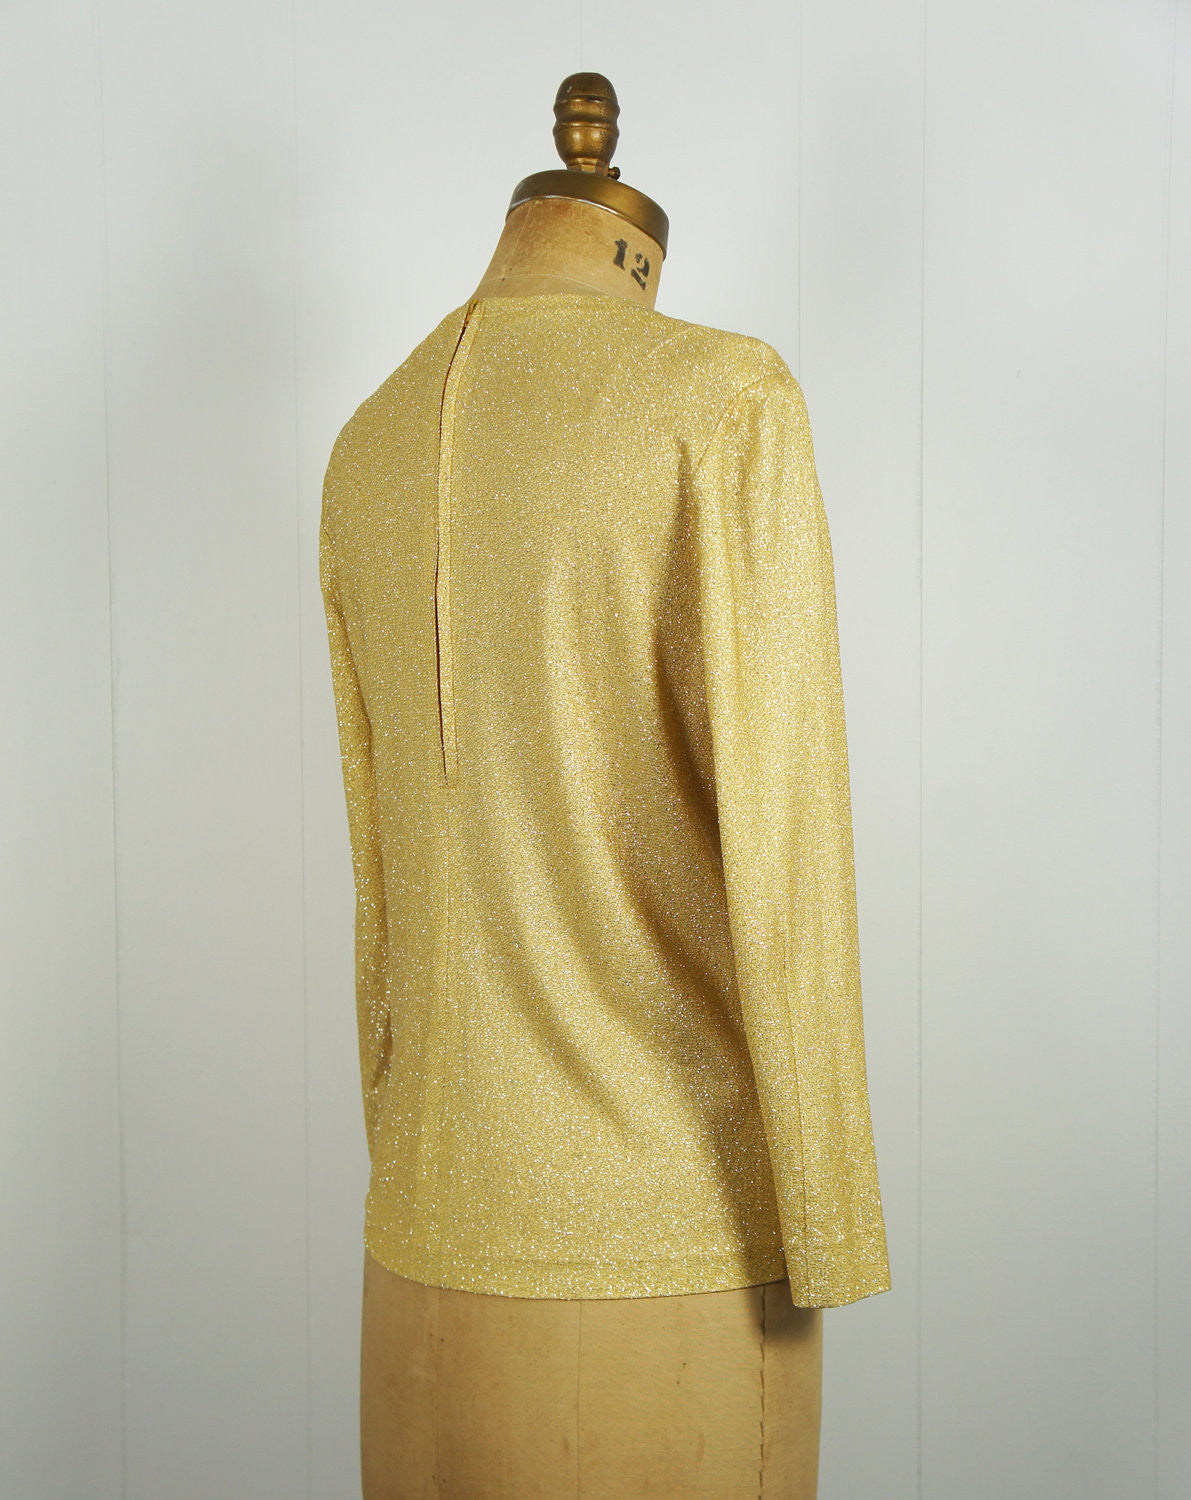 1980's Gold Glitter Long Sleeve Sparkle Top, Size L